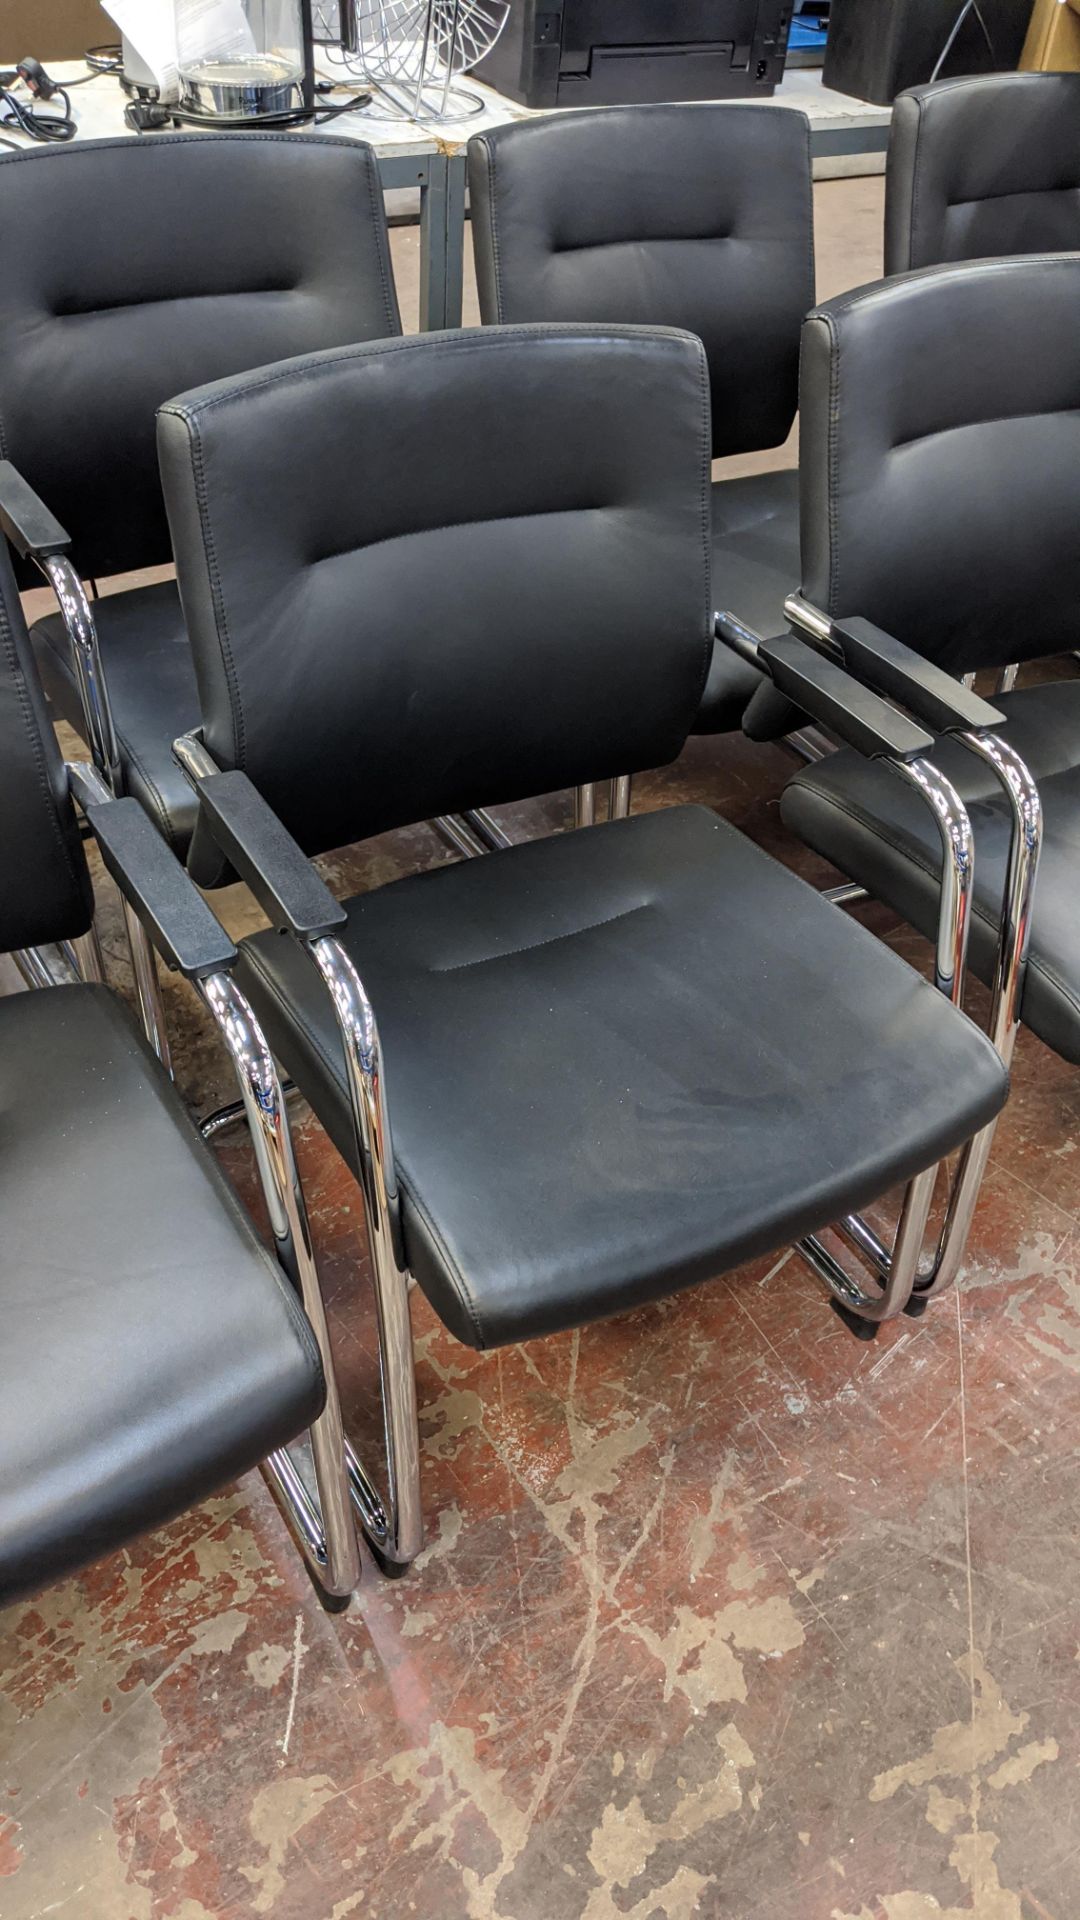 6 off matching black leather chairs on chrome bases NB. Lots 294 & 295 consist of different quantiti - Image 4 of 6